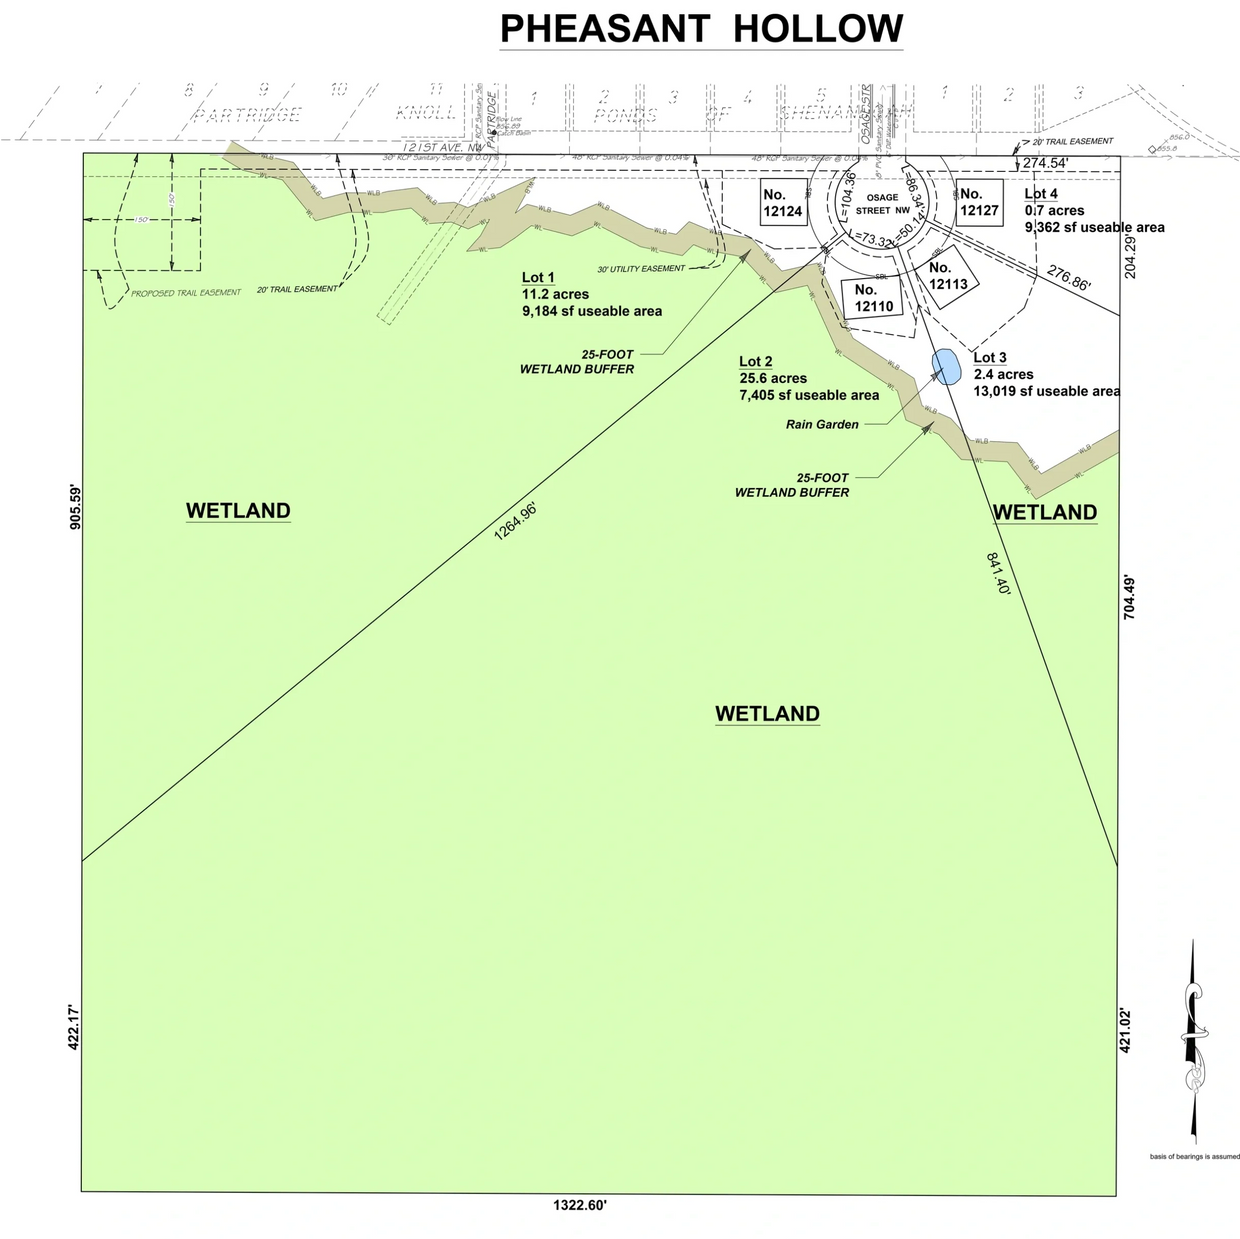 Pheasant Hollow Plat Map, New Single Family Home Neighborhood in Coon Rapids